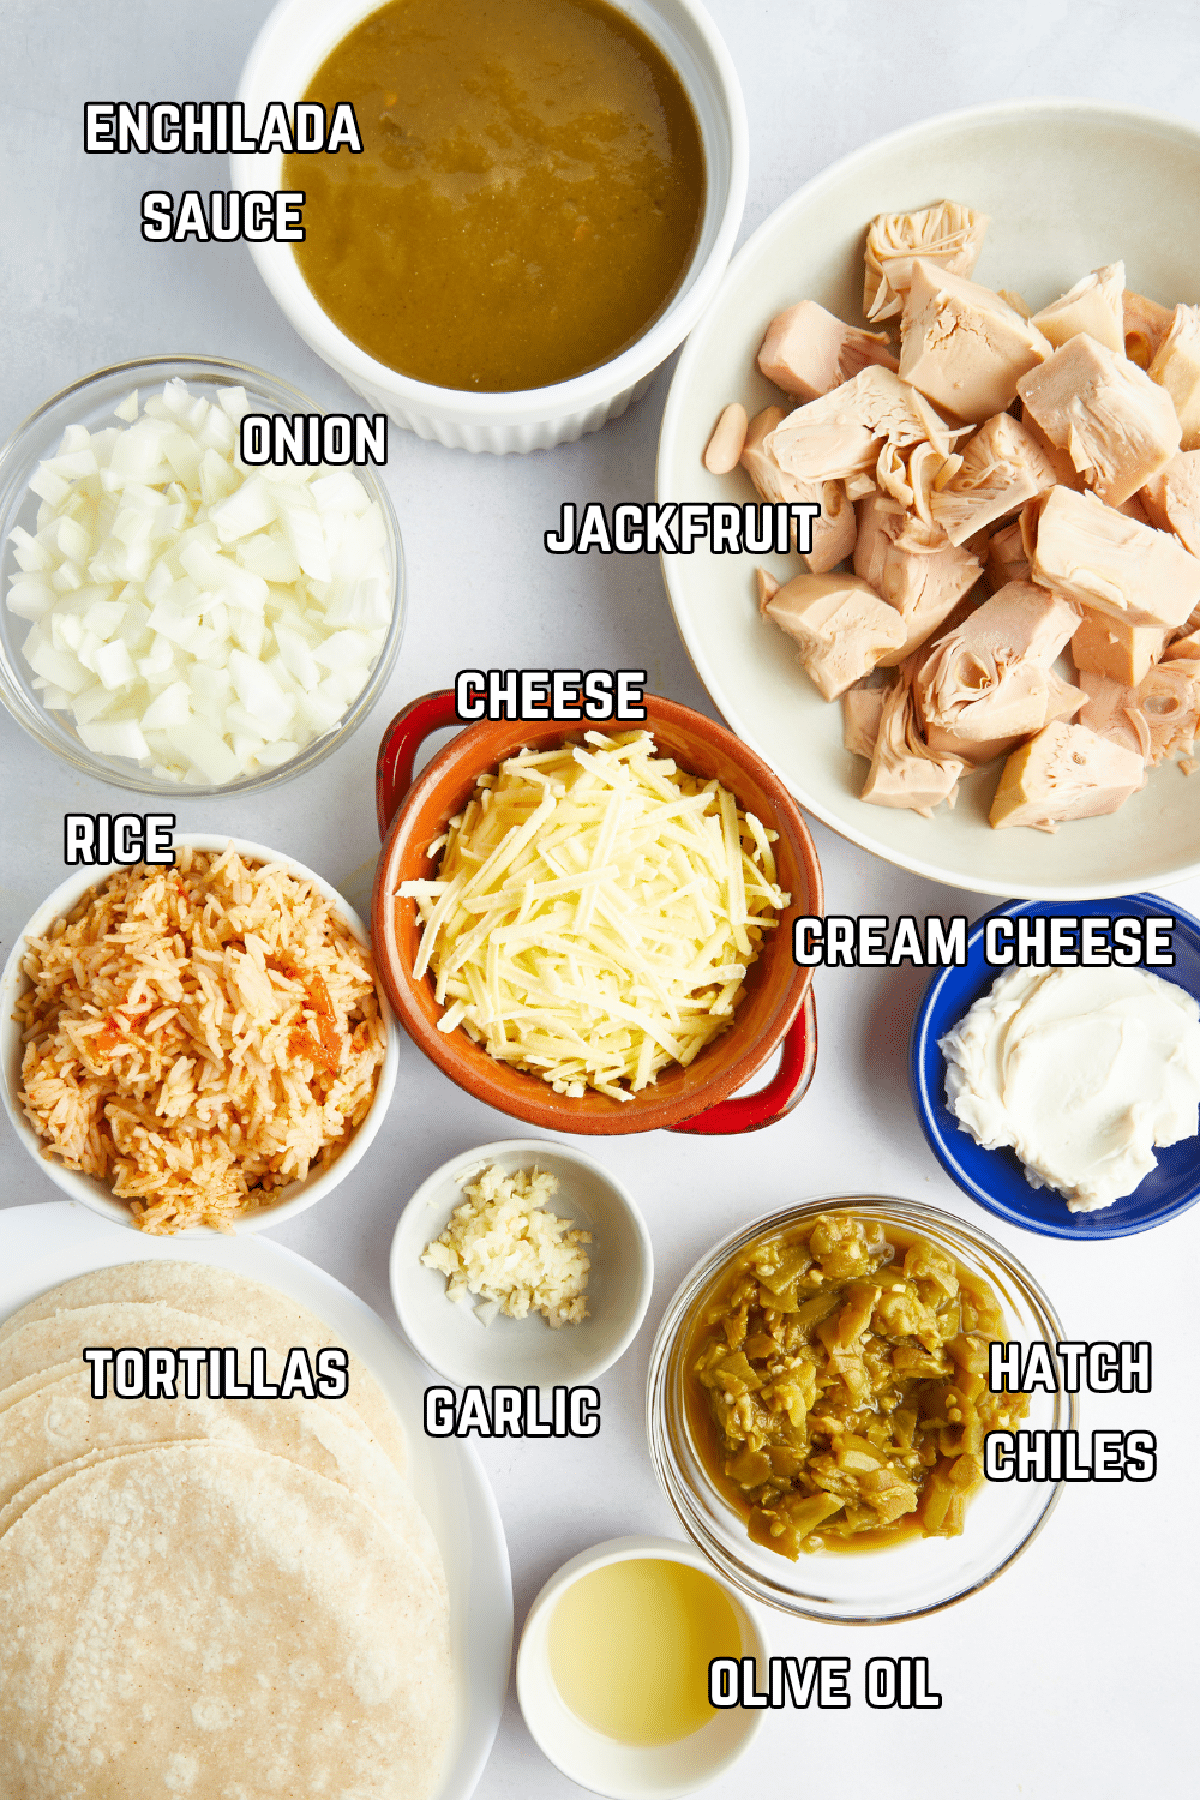 Bowls of ingredients to make Hatch chile enchiladas: sauce, jackfruit, onion, garlic, rice, cheese, cream cheese, tortillas, Hatch chiles, and spices.